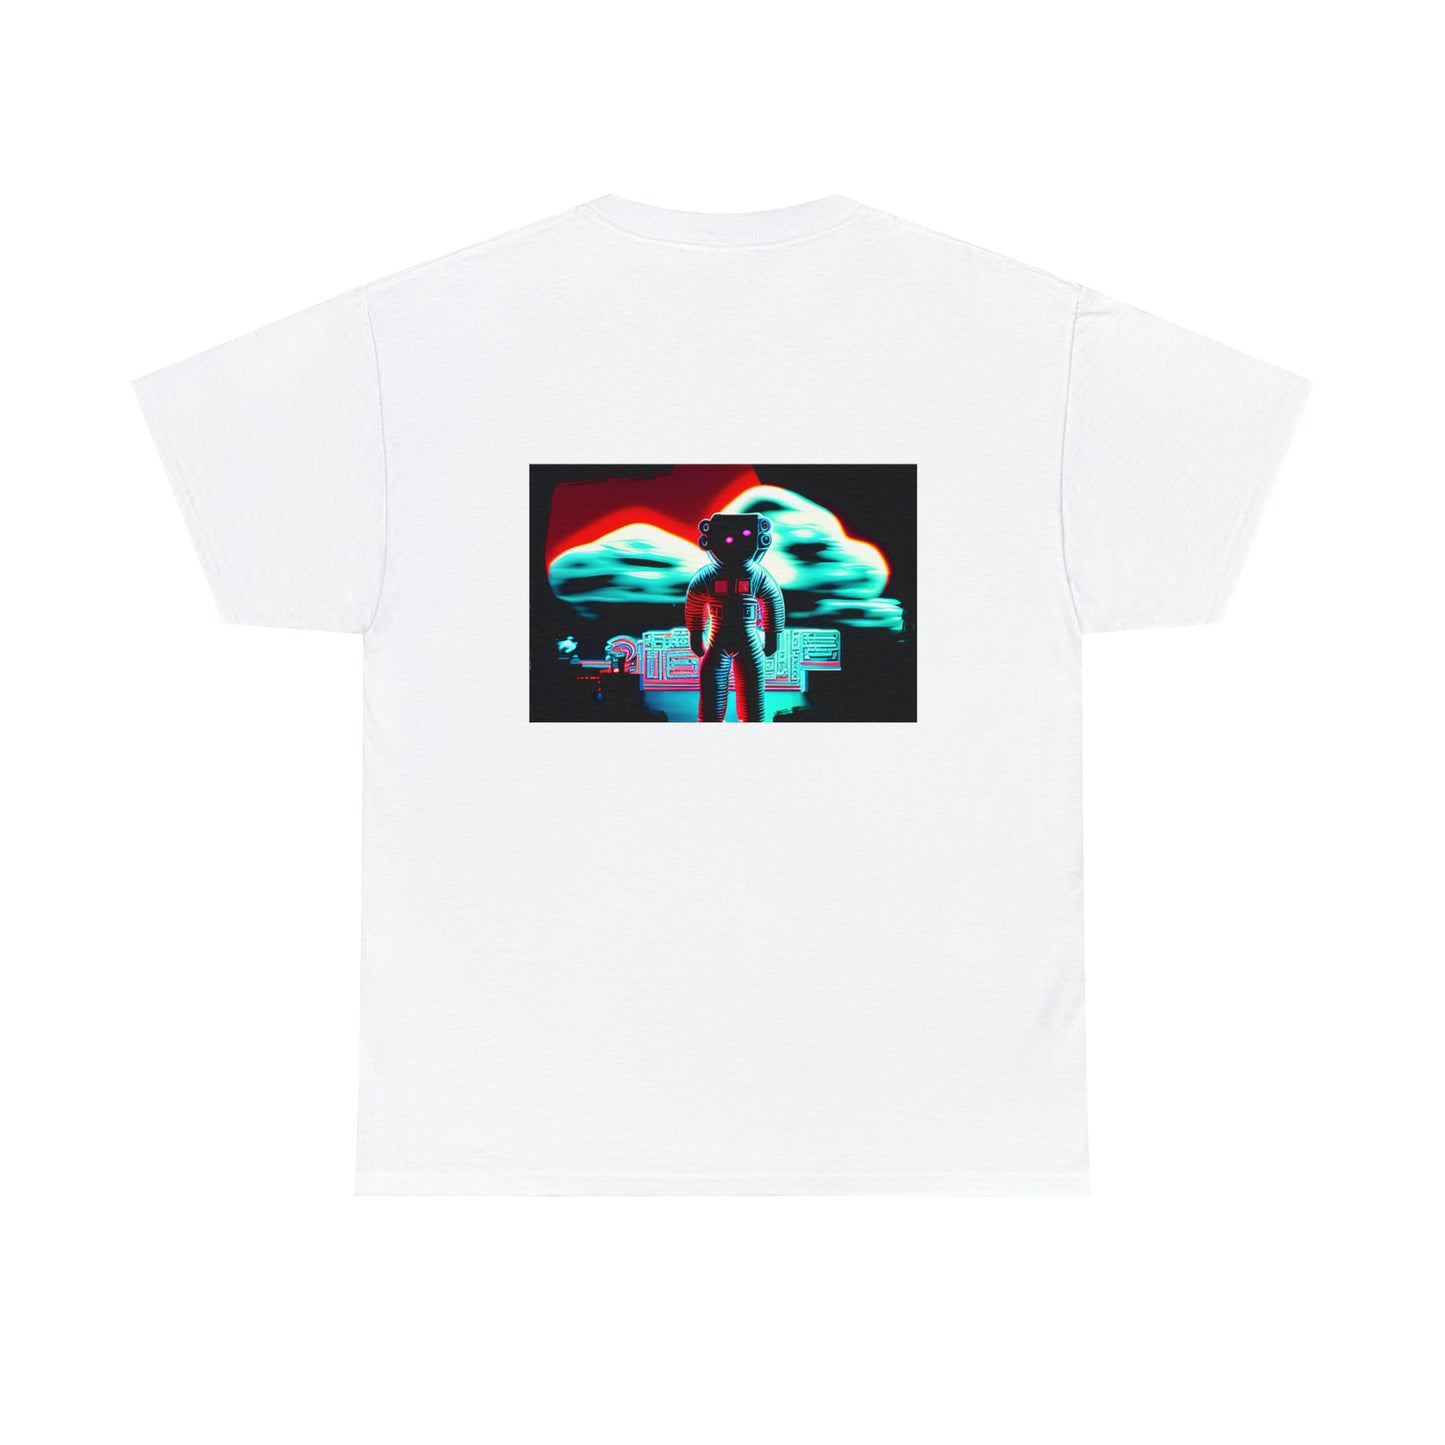 Galactic Groove: Retro Alien Voyager Tee - Sky High West Chester